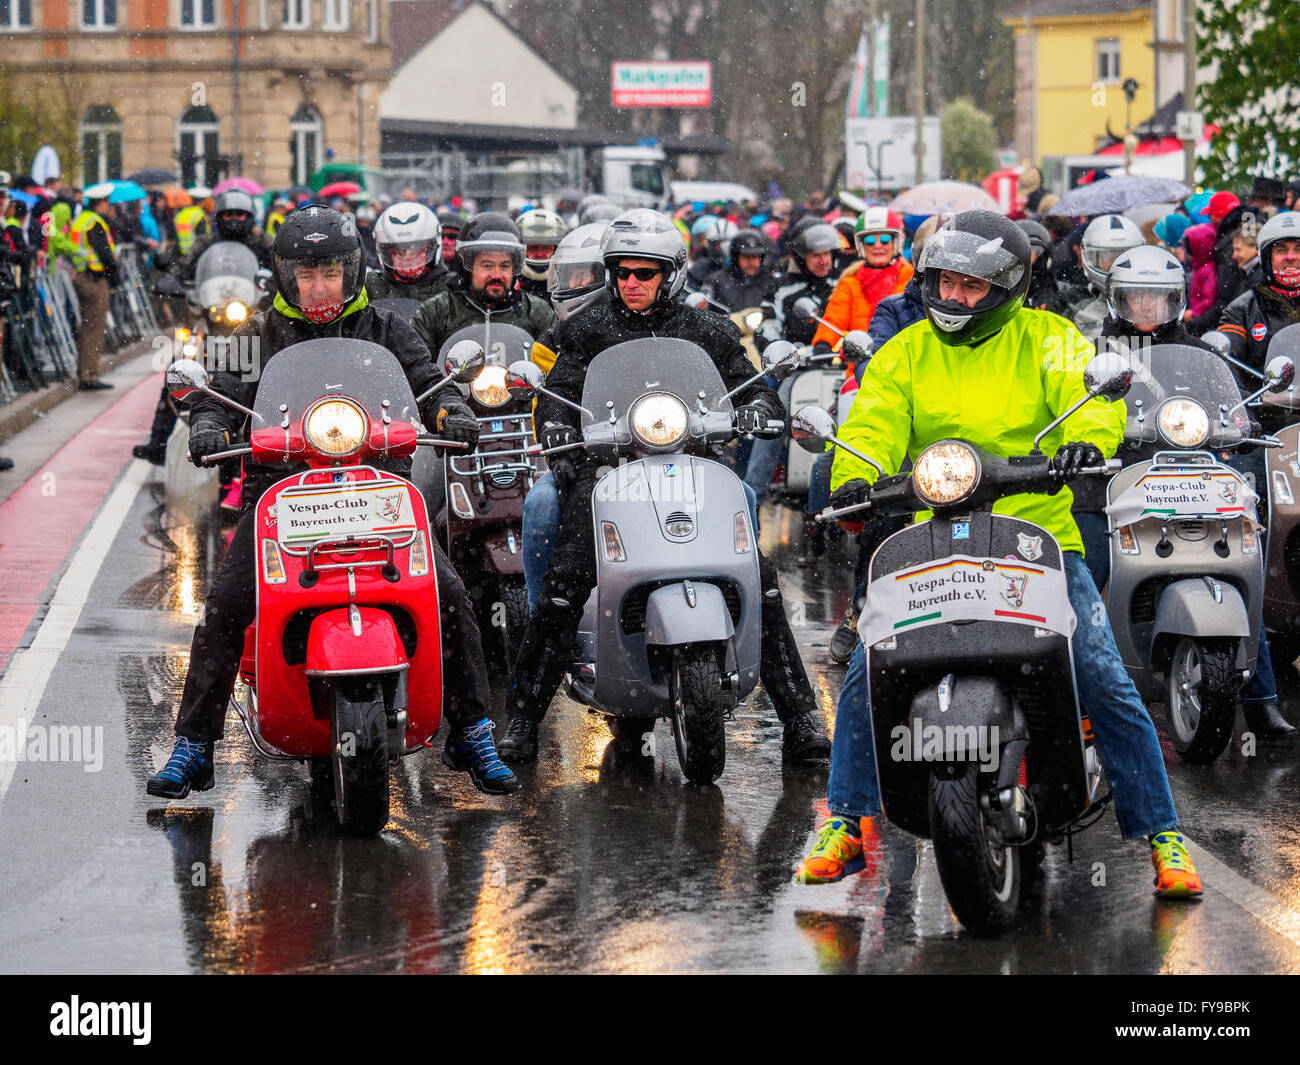 Motorcyclists on Vespars drive in a procession through the town of Kulmbach, Germany, 24 April 2016. More than 1,000 motorcycle enthusiasts have come toegther for the traditional 16th 'Motorrad-Sternfahrt' (Motorcycle procession). Photo: Nicolas Armer/dpa Stock Photo